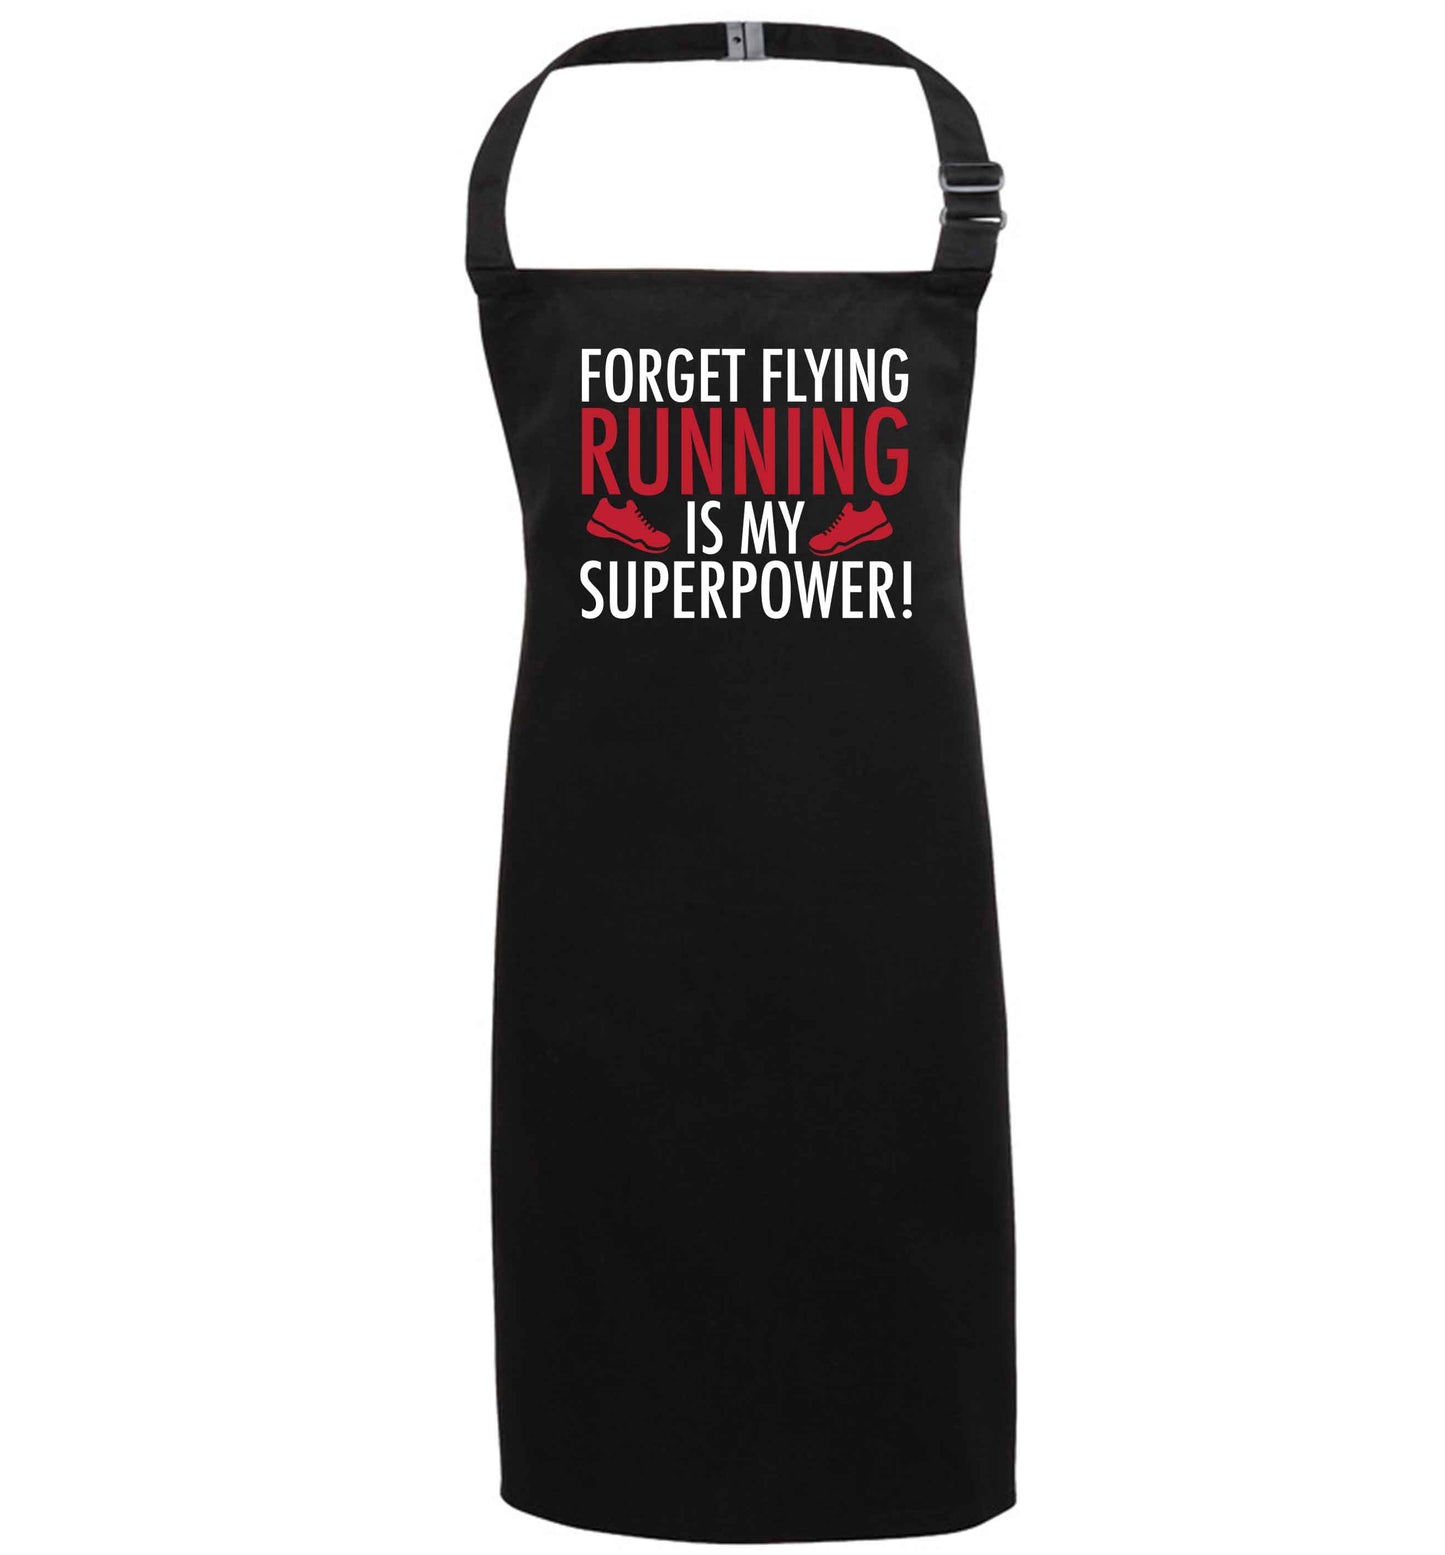 Forget flying running is my superpower black apron 7-10 years